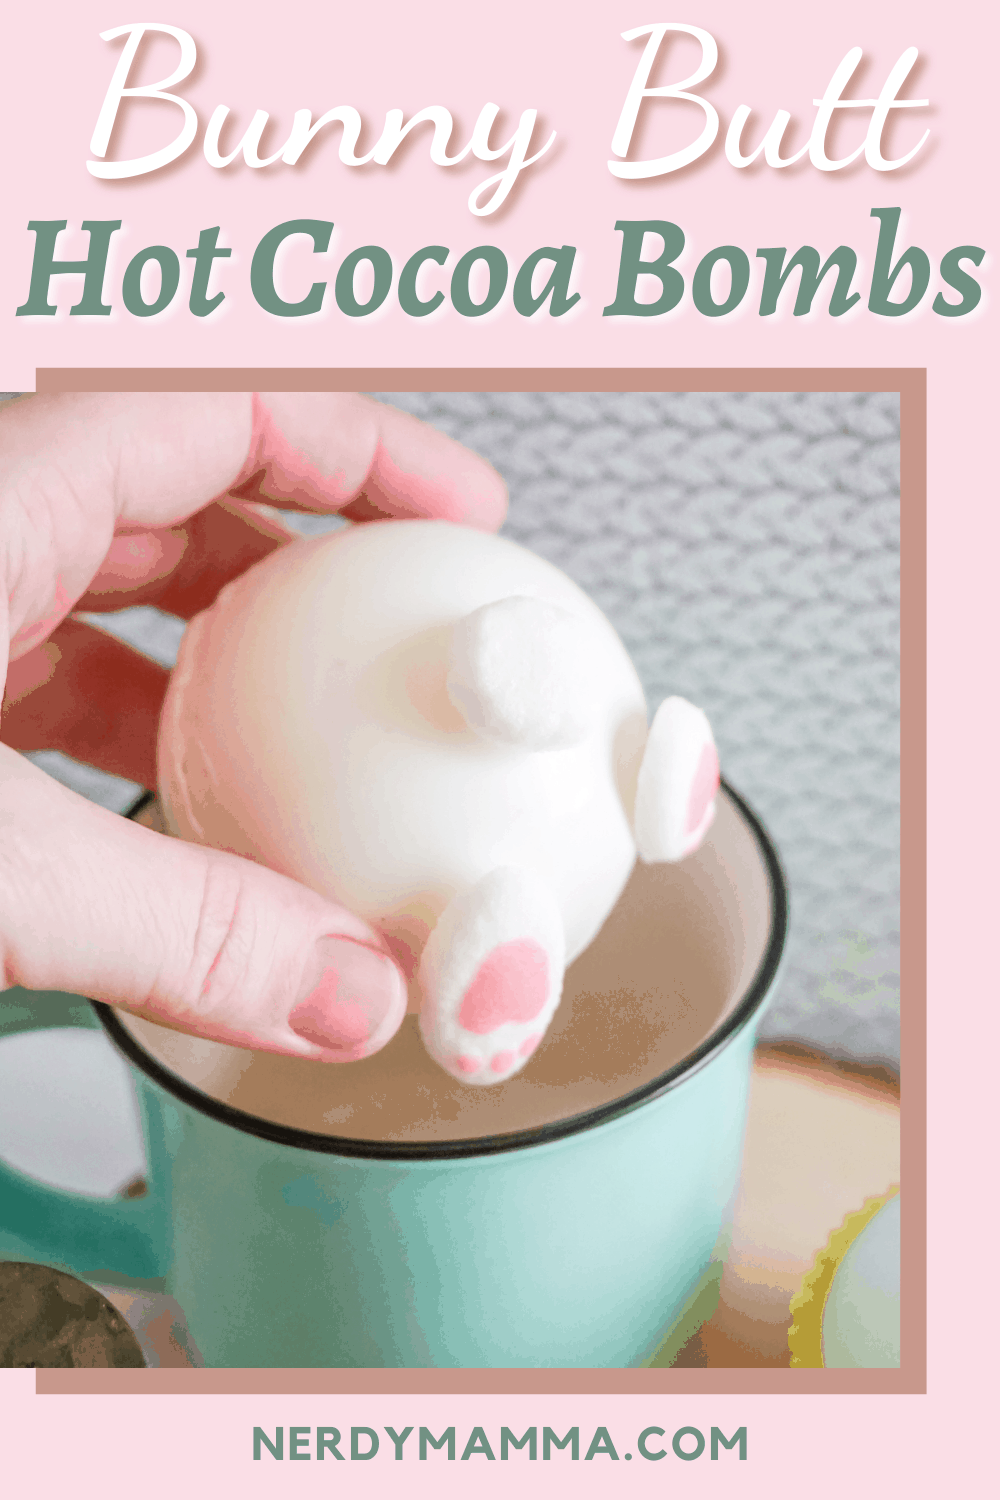 Bunny Butt Hot Cocoa Bombs for easter 